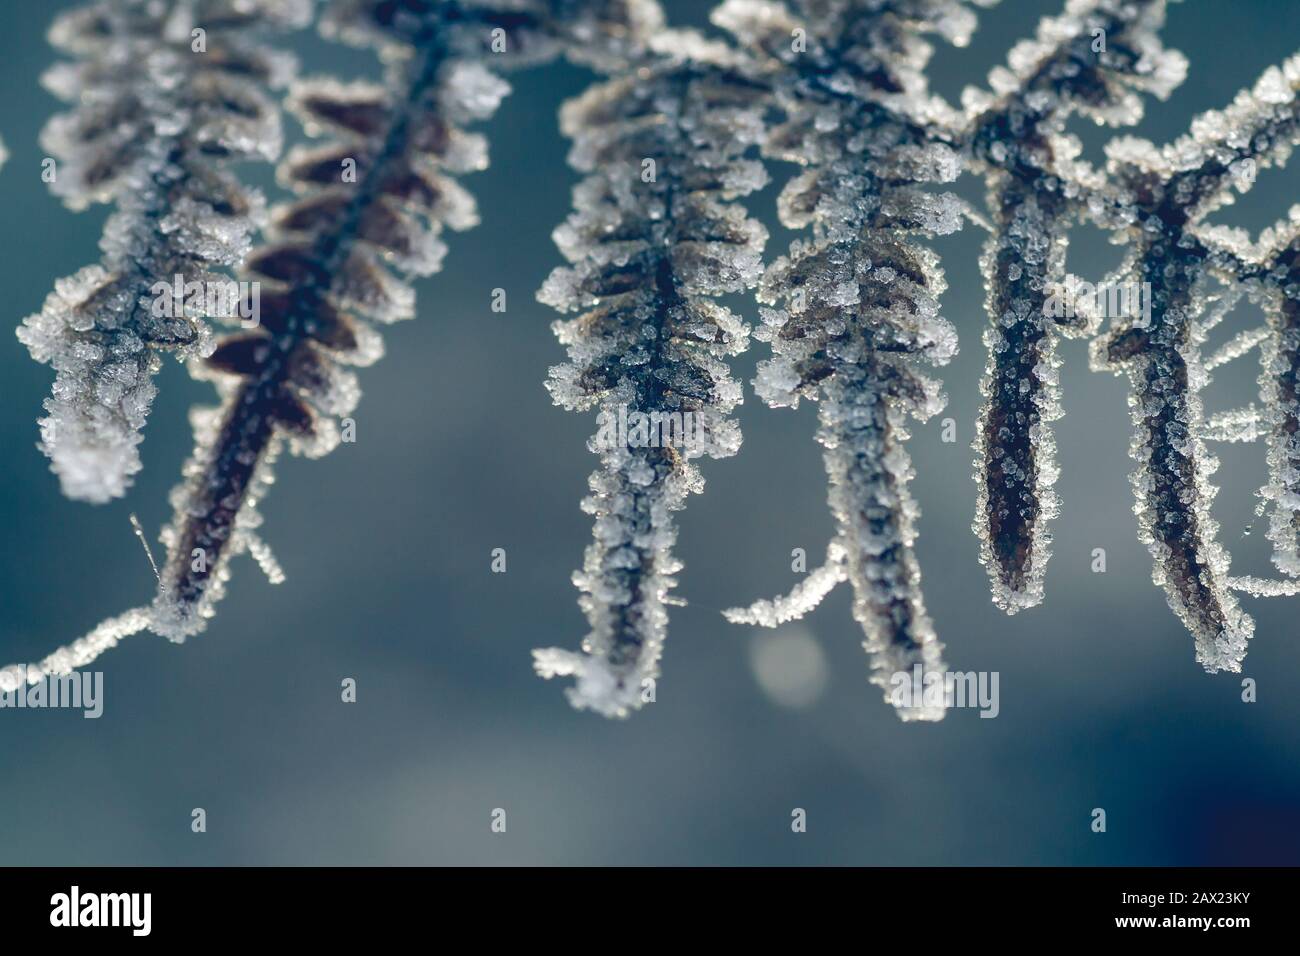 Detail of lady fern frosted fronds Stock Photo